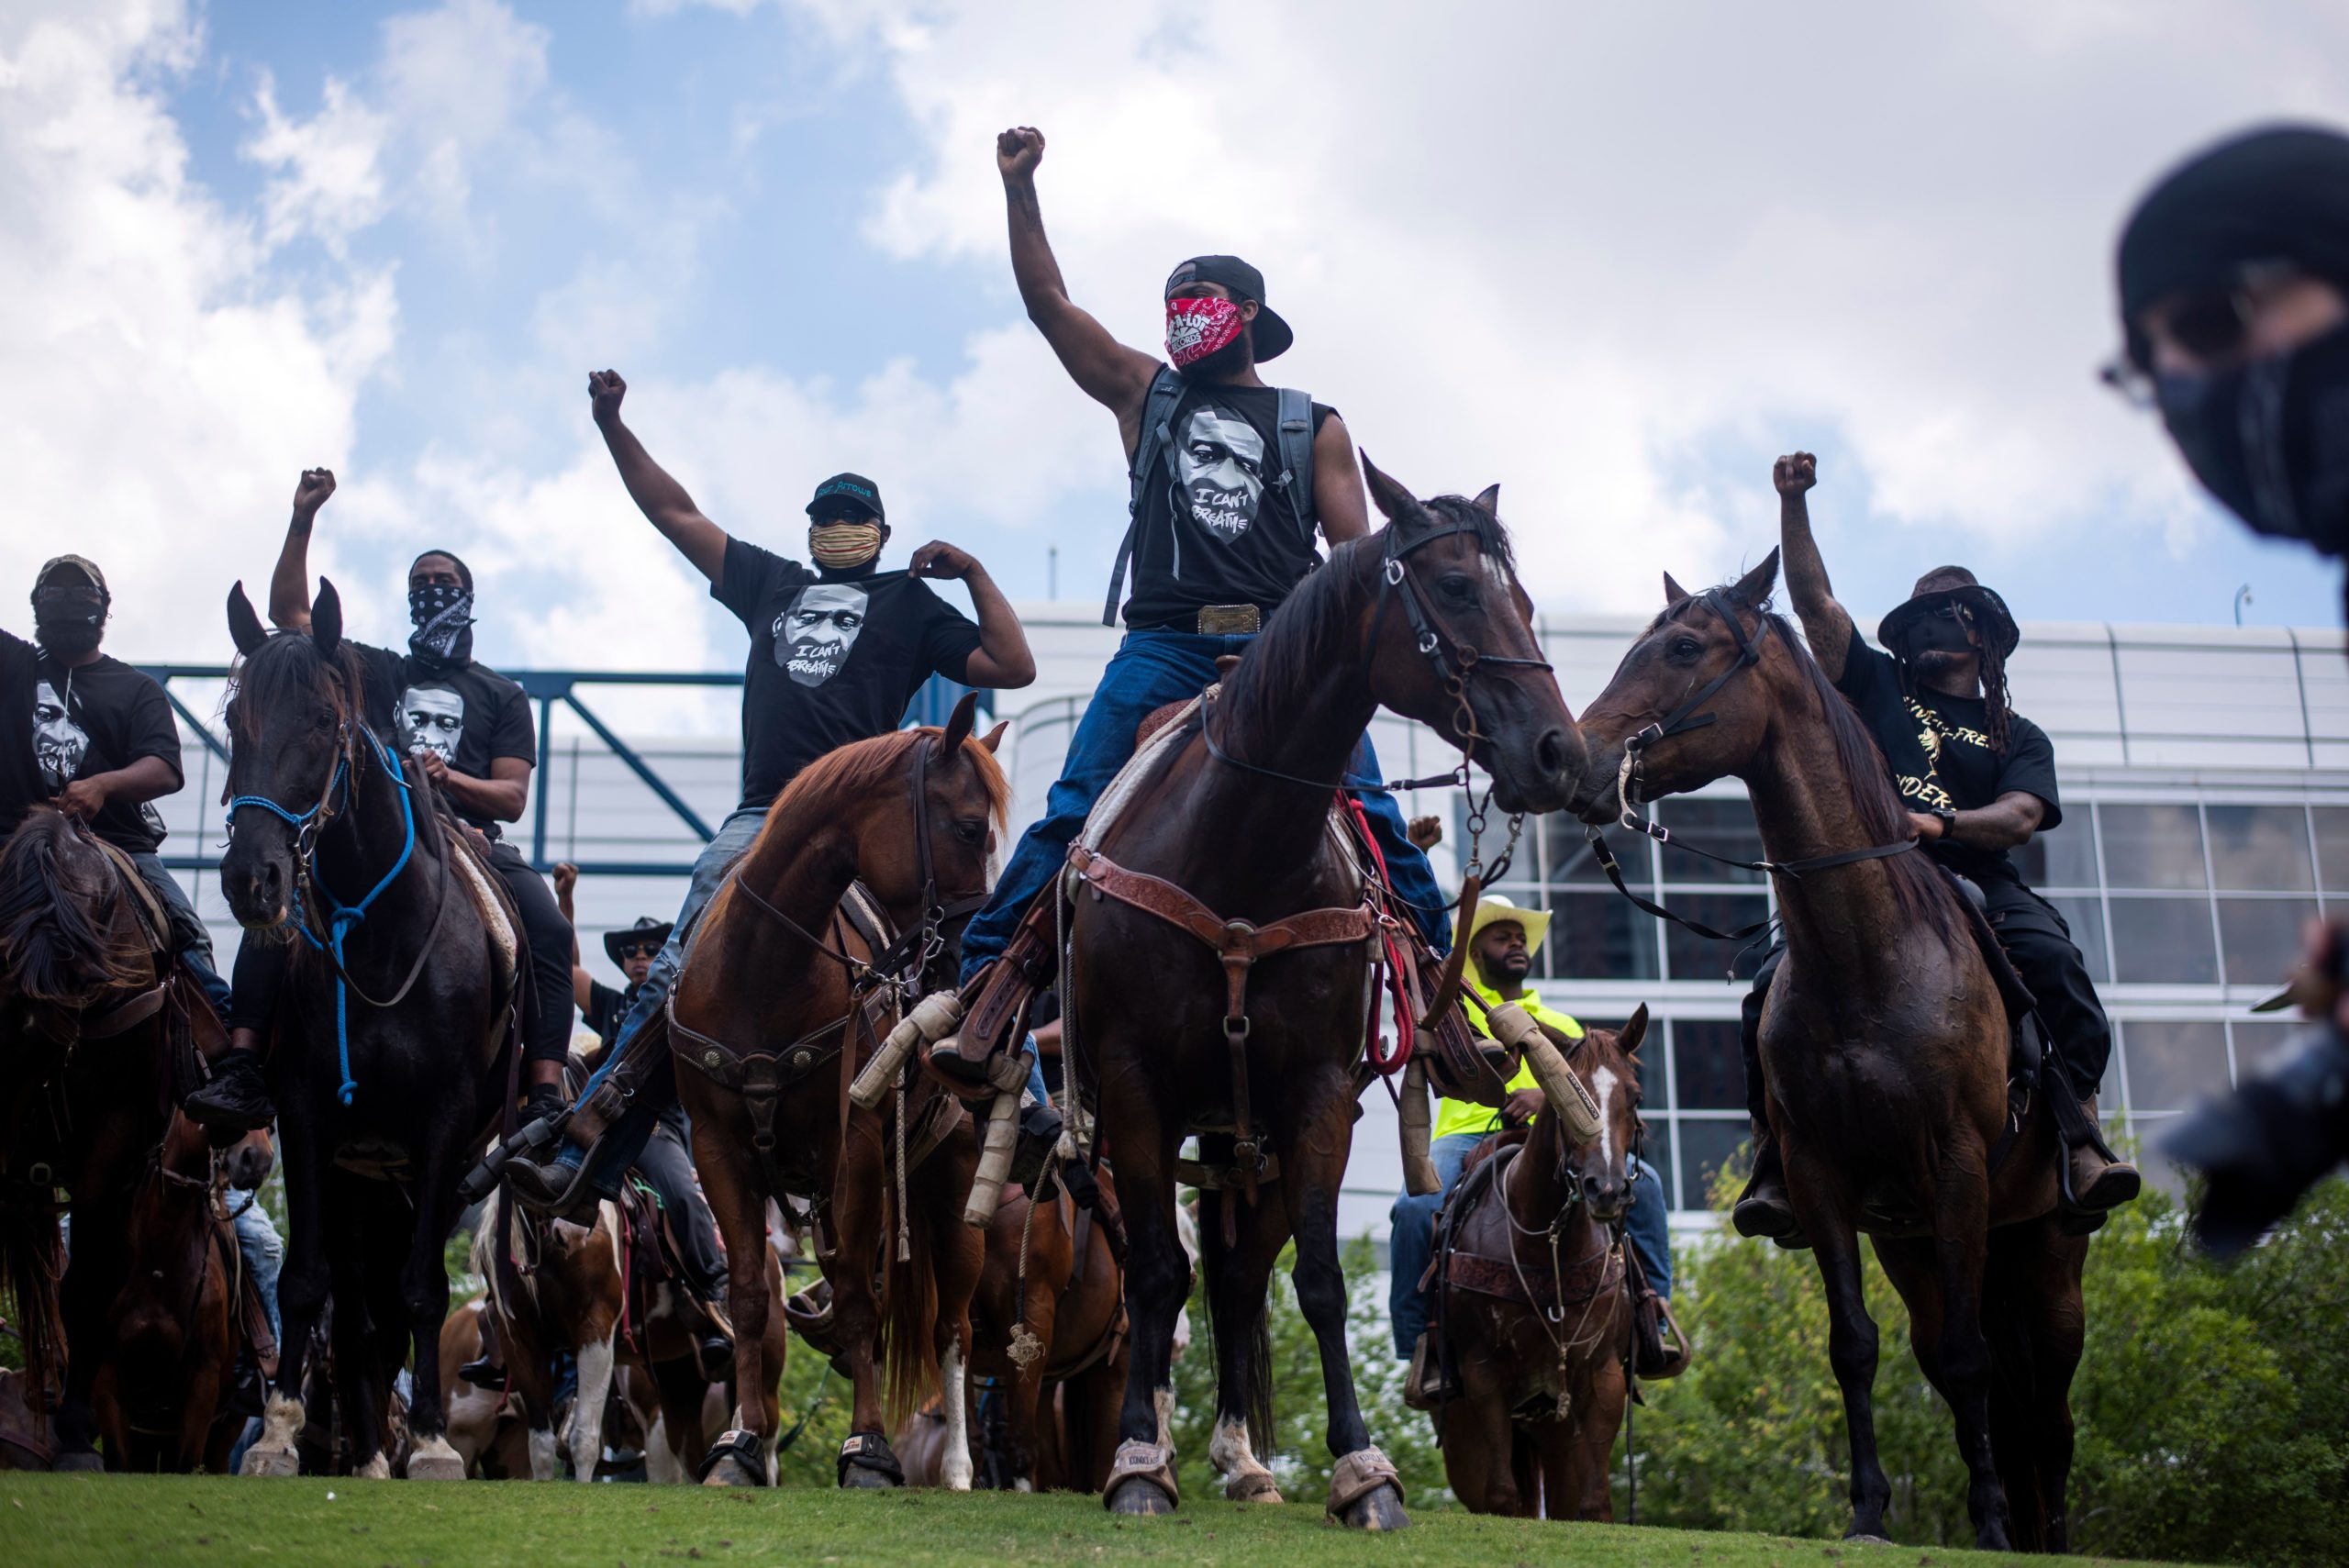 TOPSHOT - Protesters demonstrate to mourn the death of George Floyd during a march across downtown Houston, Texas, on June 2, 2020. - Anti-racism protests have put several US cities under curfew to suppress rioting, following the death of George Floyd while in police custody. (Photo by Mark Felix / AFP) (Photo by MARK FELIX/AFP via Getty Images)